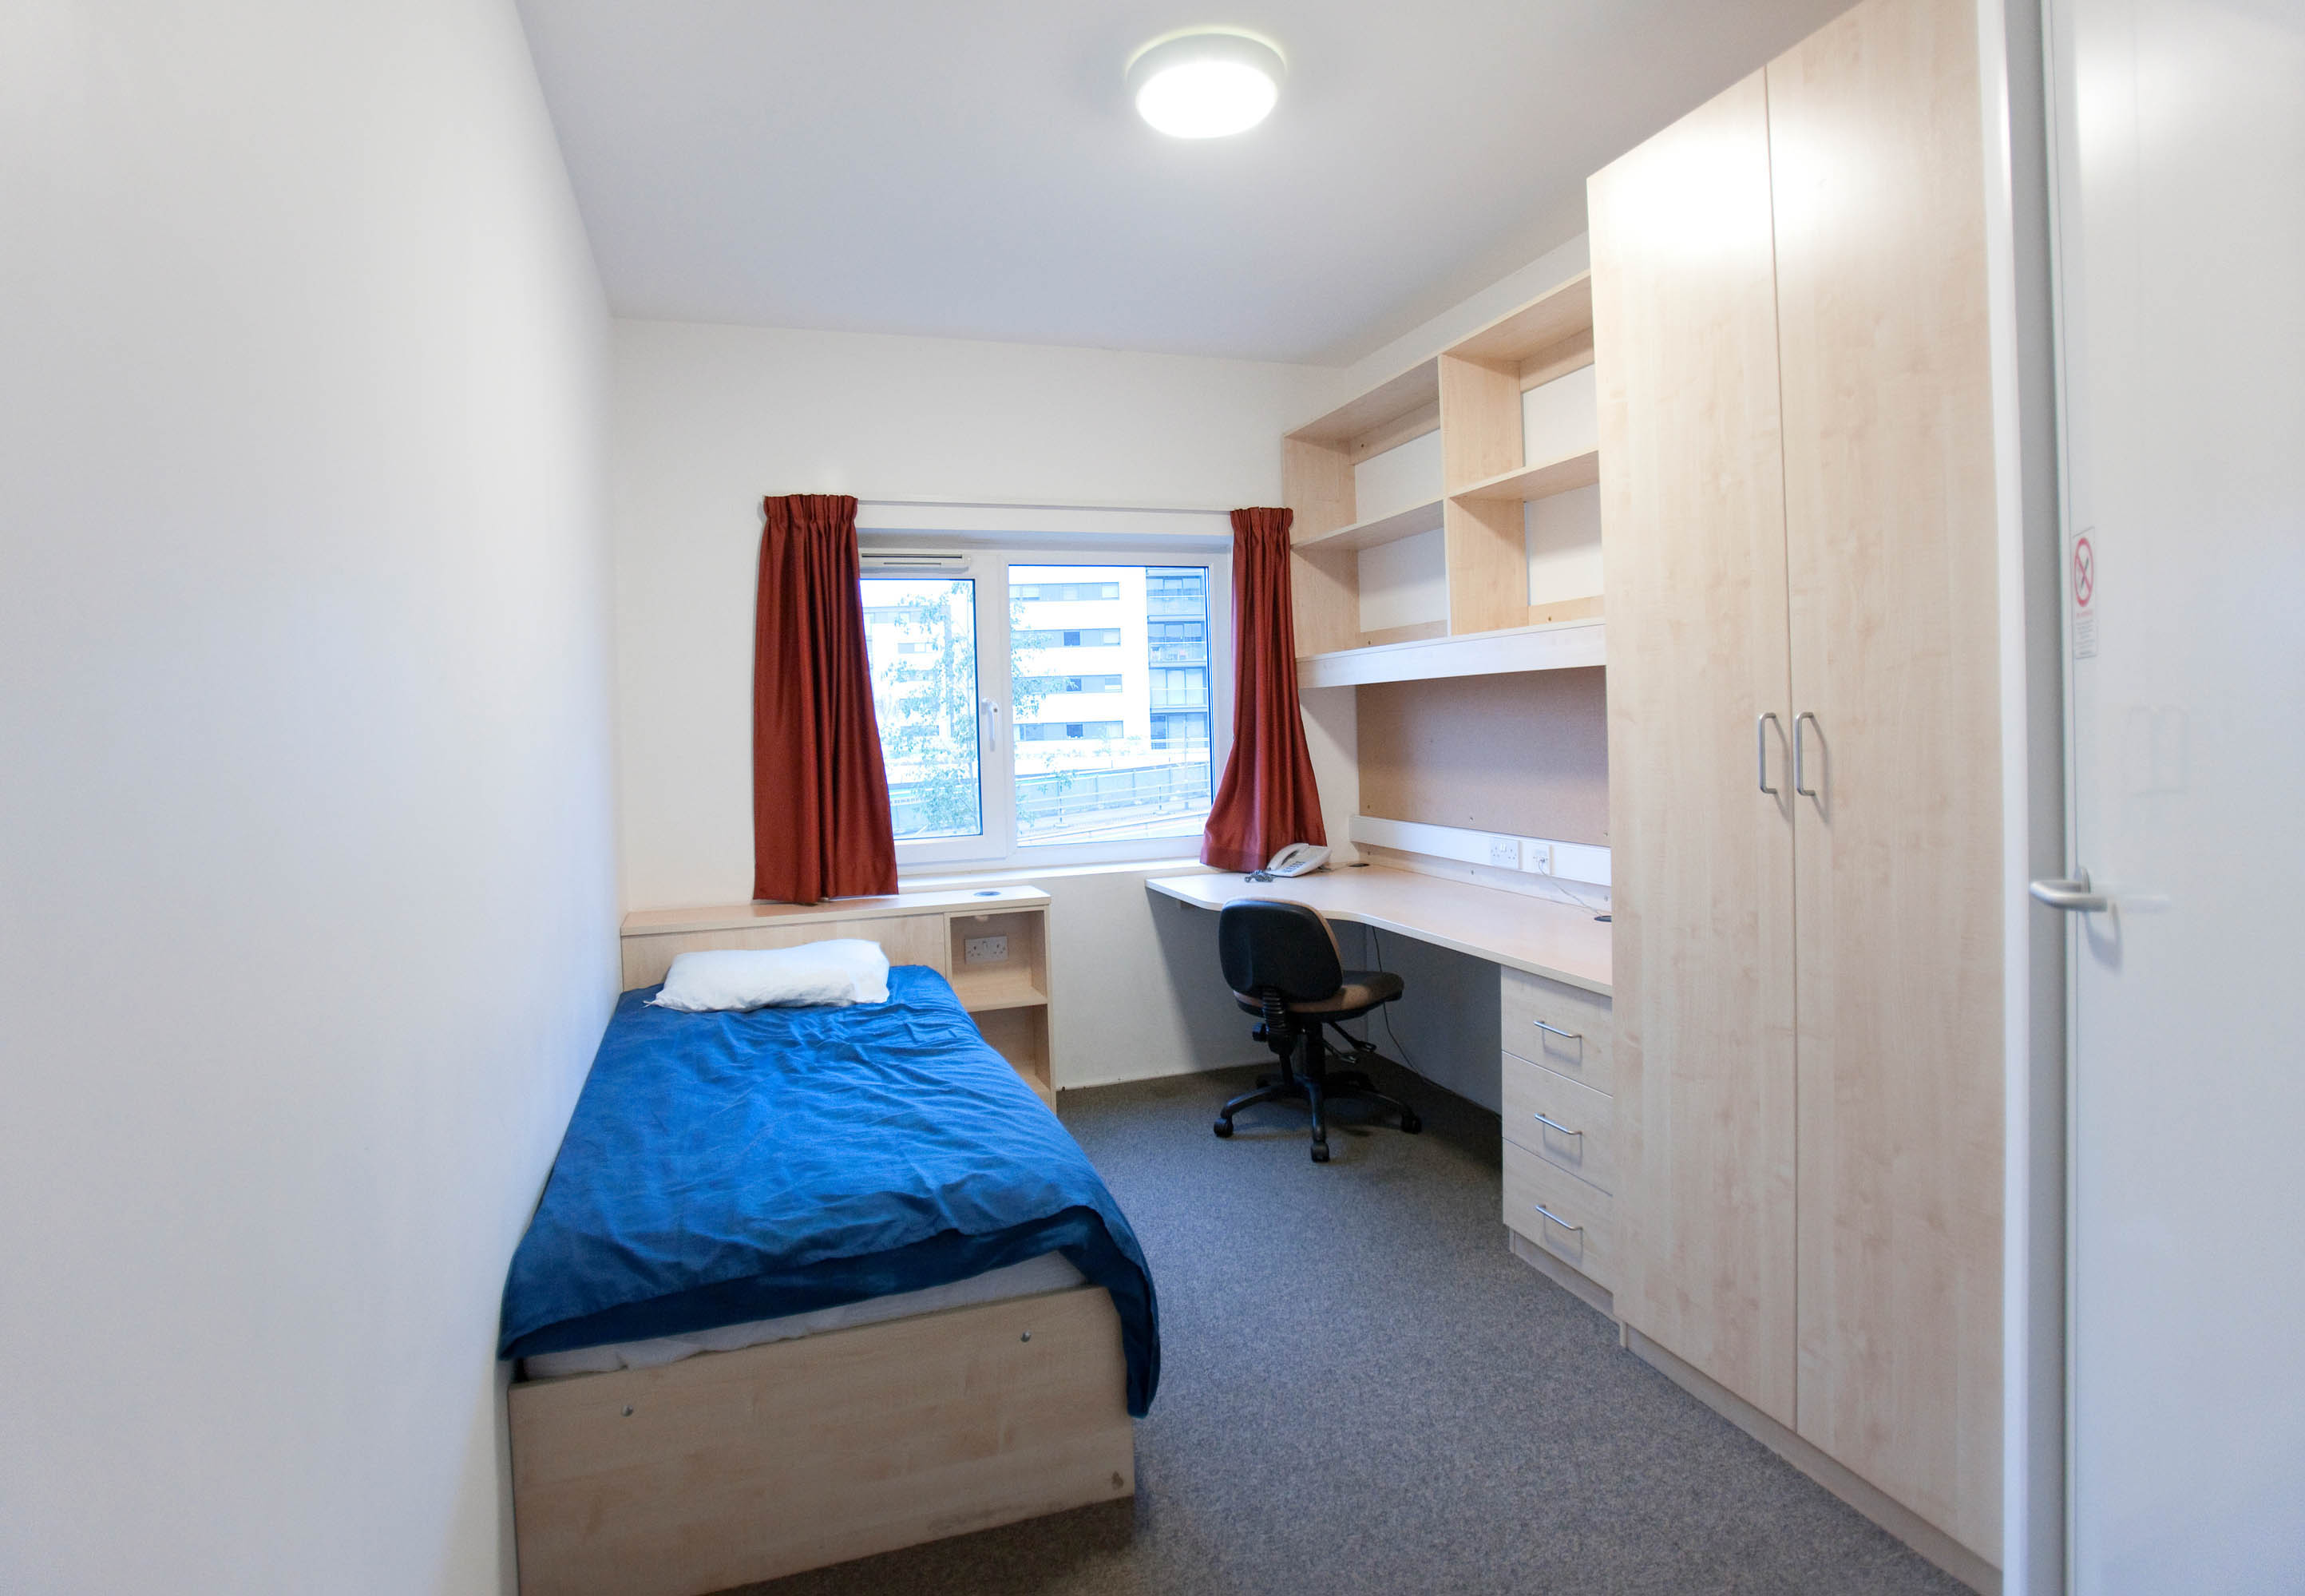 Accommodation at the Docklands Embassy Summer School